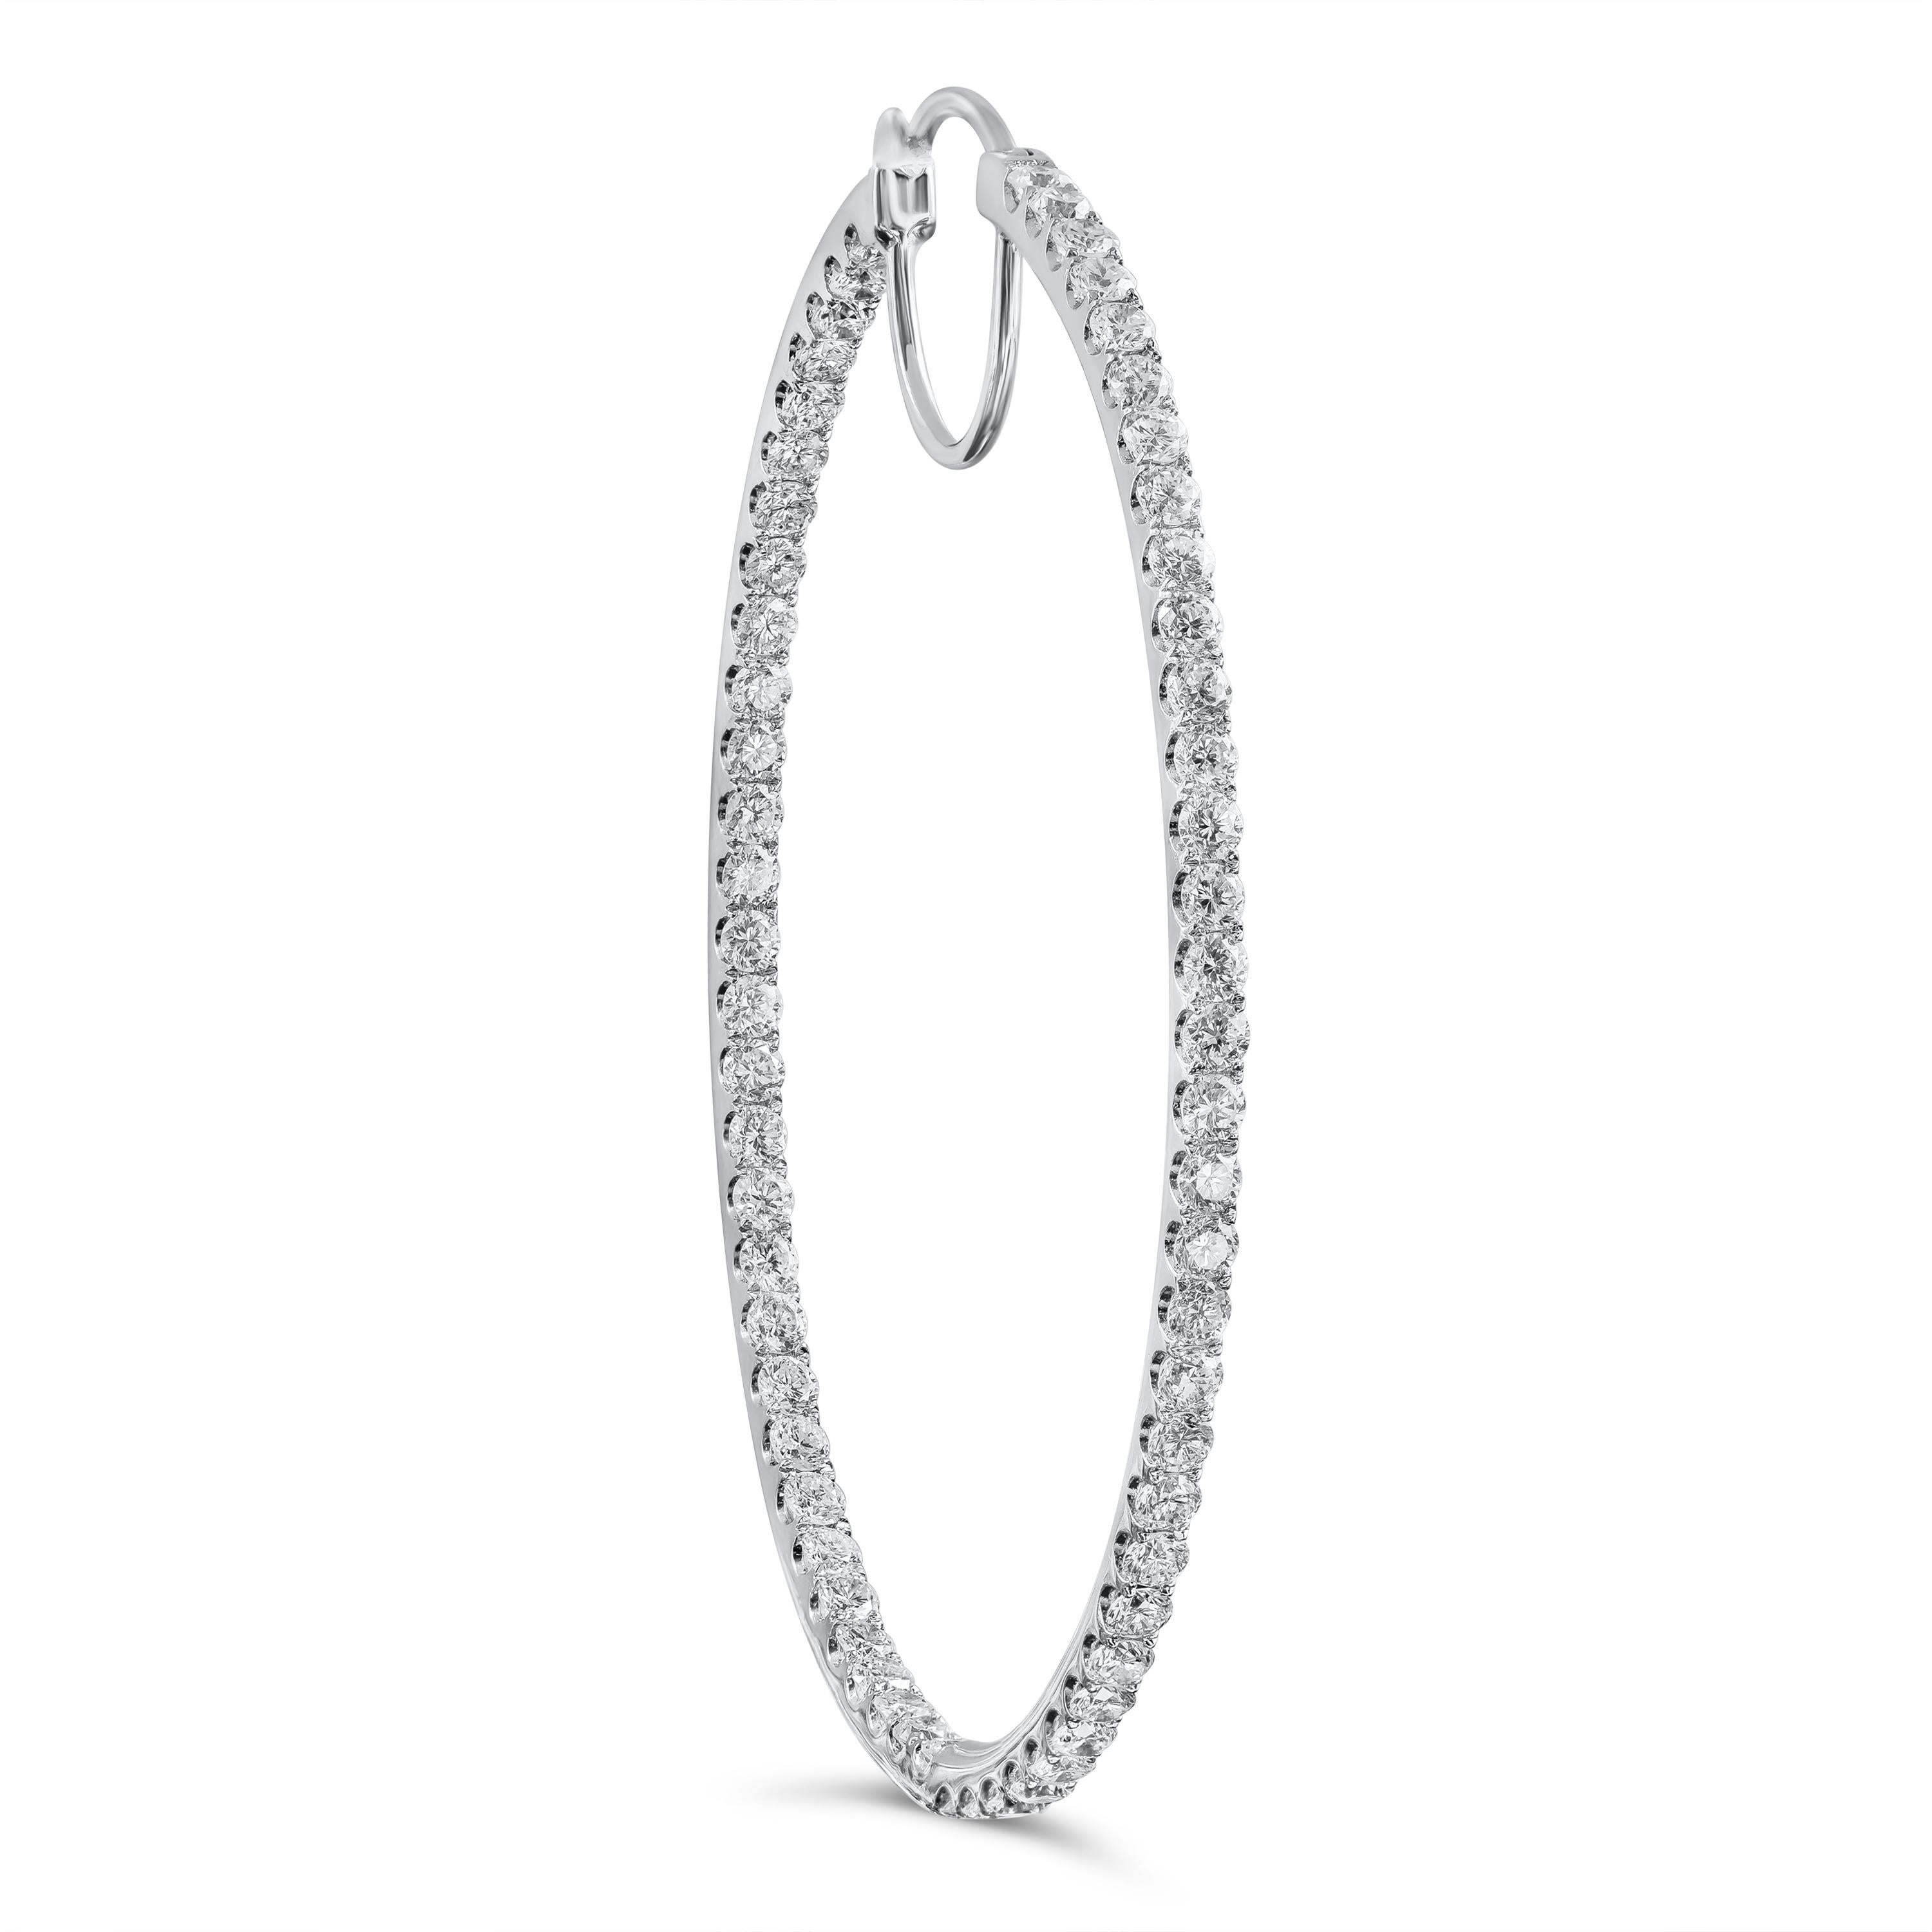 A brilliant pair of hoop earrings showcasing a row of sparkling round diamonds set in a scalloped pave design in 18k white gold. The earrings have a chic oval-shaped design. Diamonds weigh 3.67 carats total. Approximately 2 inches in